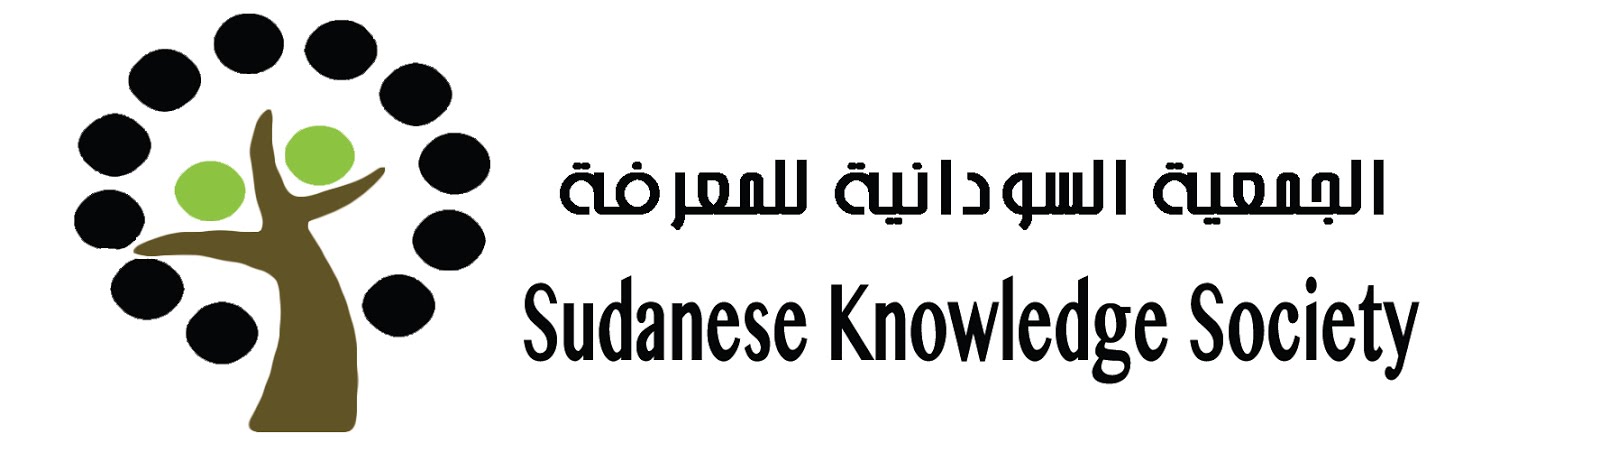 Organized by Sudanese Knowledge Society